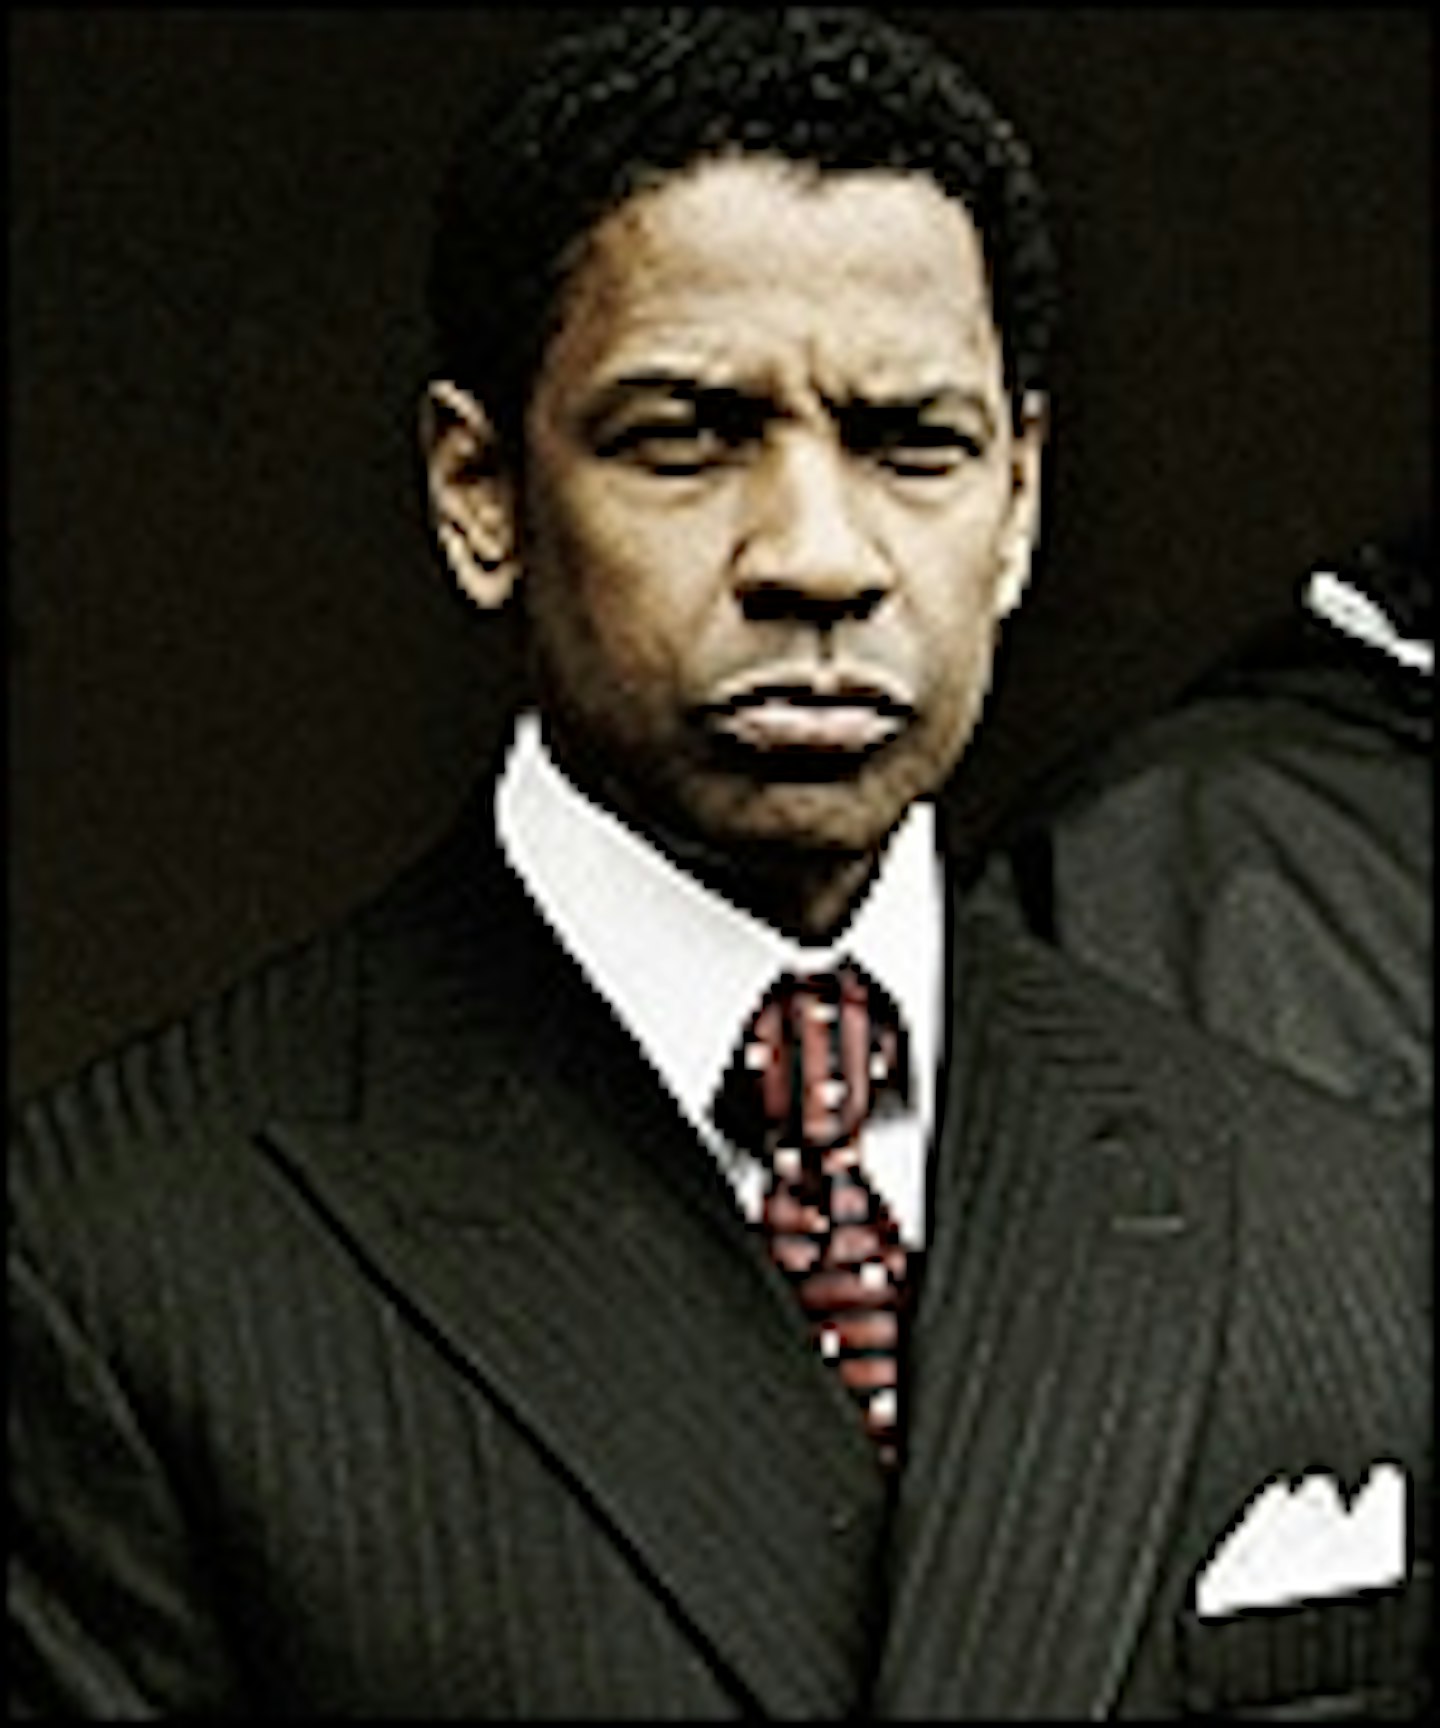 Exclusive: New American Gangster Clip